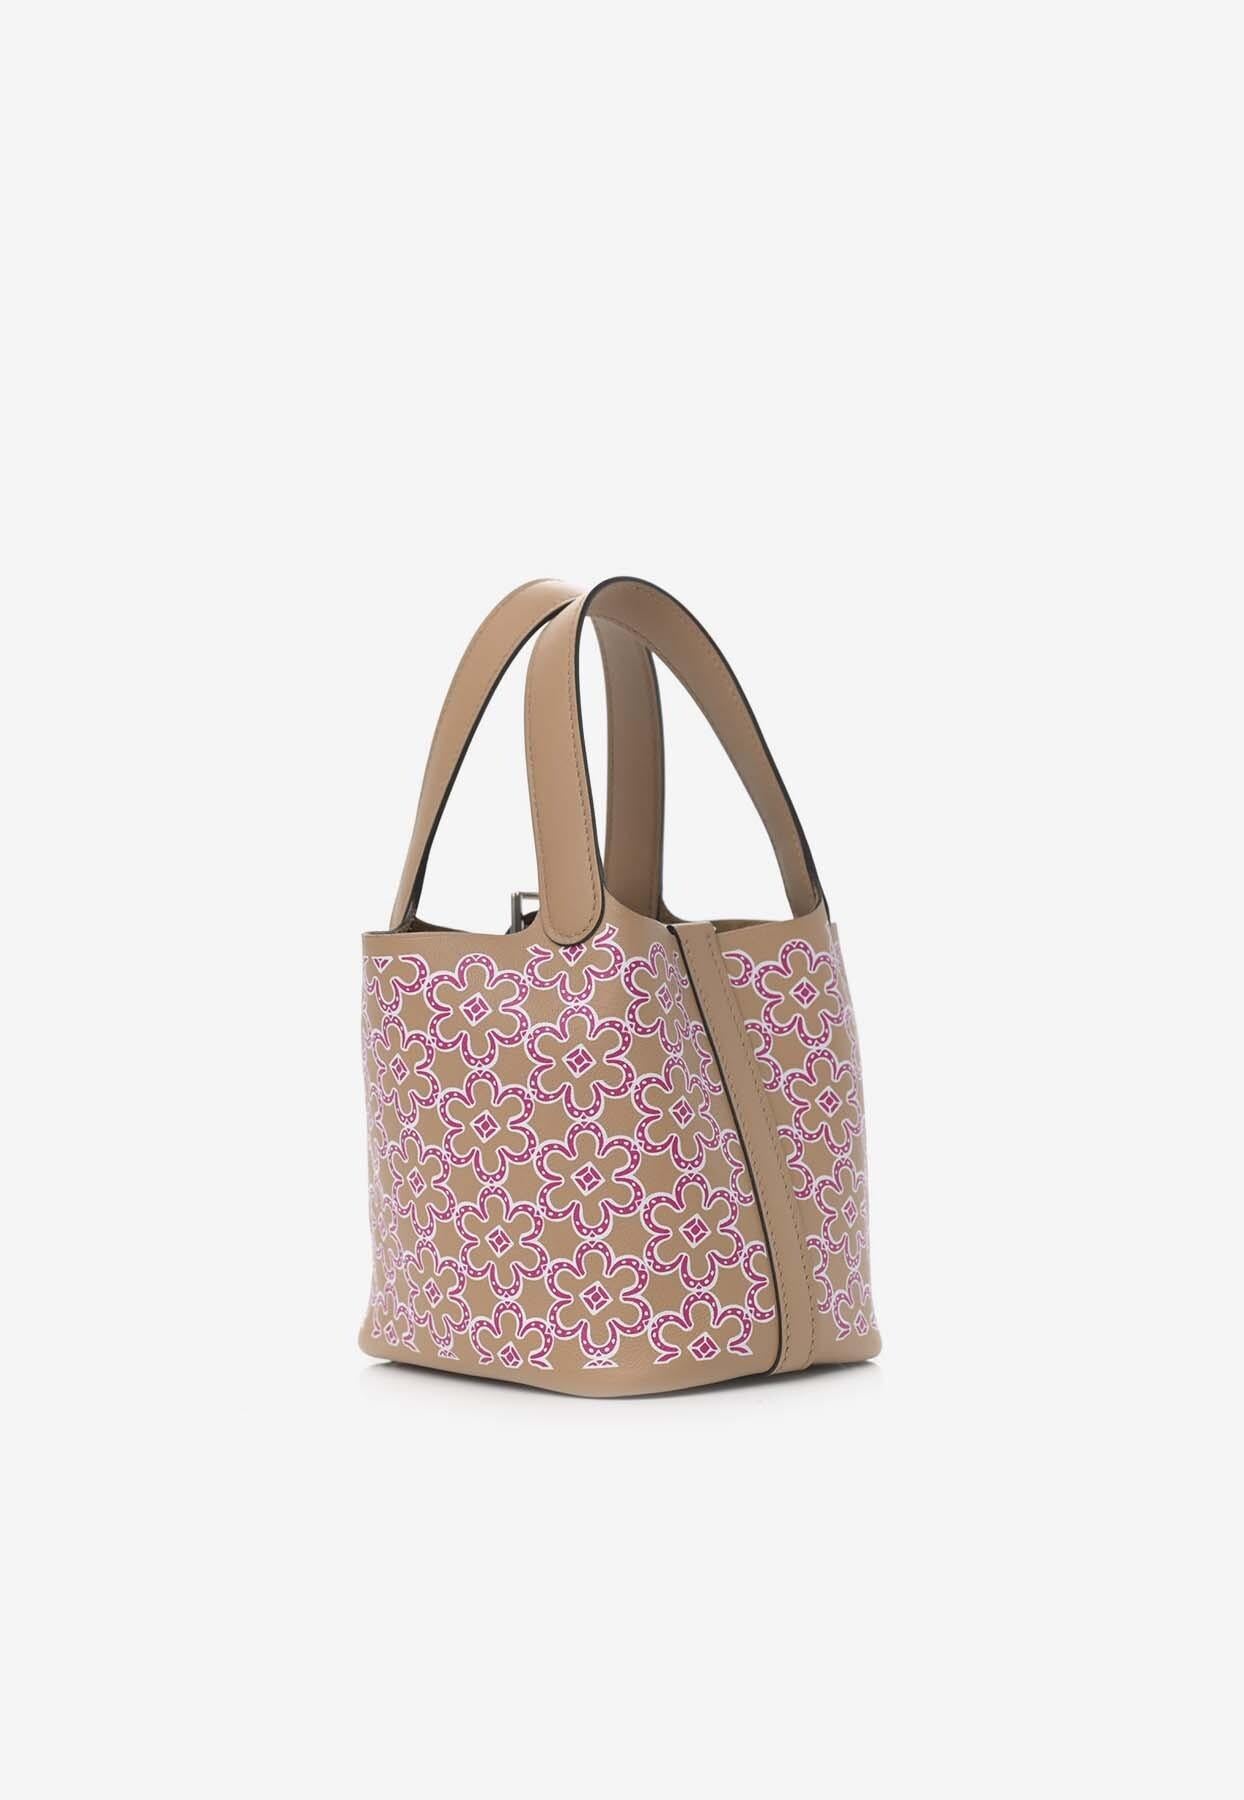 Material: 100% Swift leather
Pink floral print
Multicolor silhouette
Palladium hardware
Made in France
Comes in a signature Hermès box and with a dustbag, Lock and keys